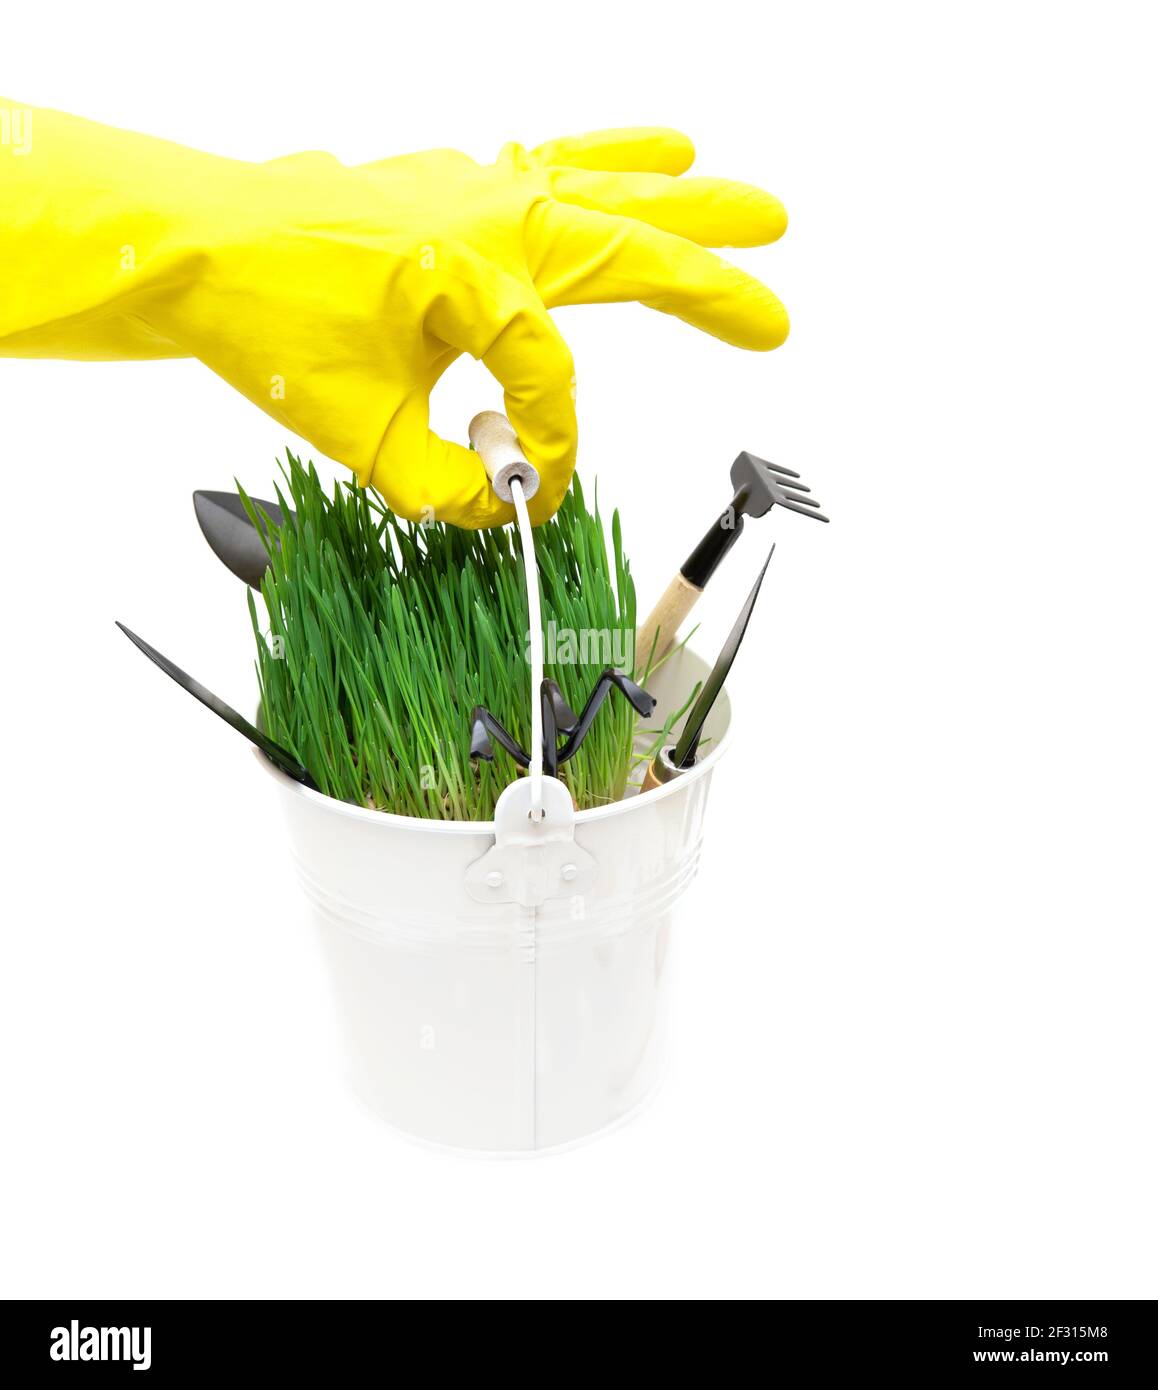 Crop view of a human hand wearing a yellow garden glove holding a small white bucket with fresh green grass and various gardening hand tools isolated Stock Photo